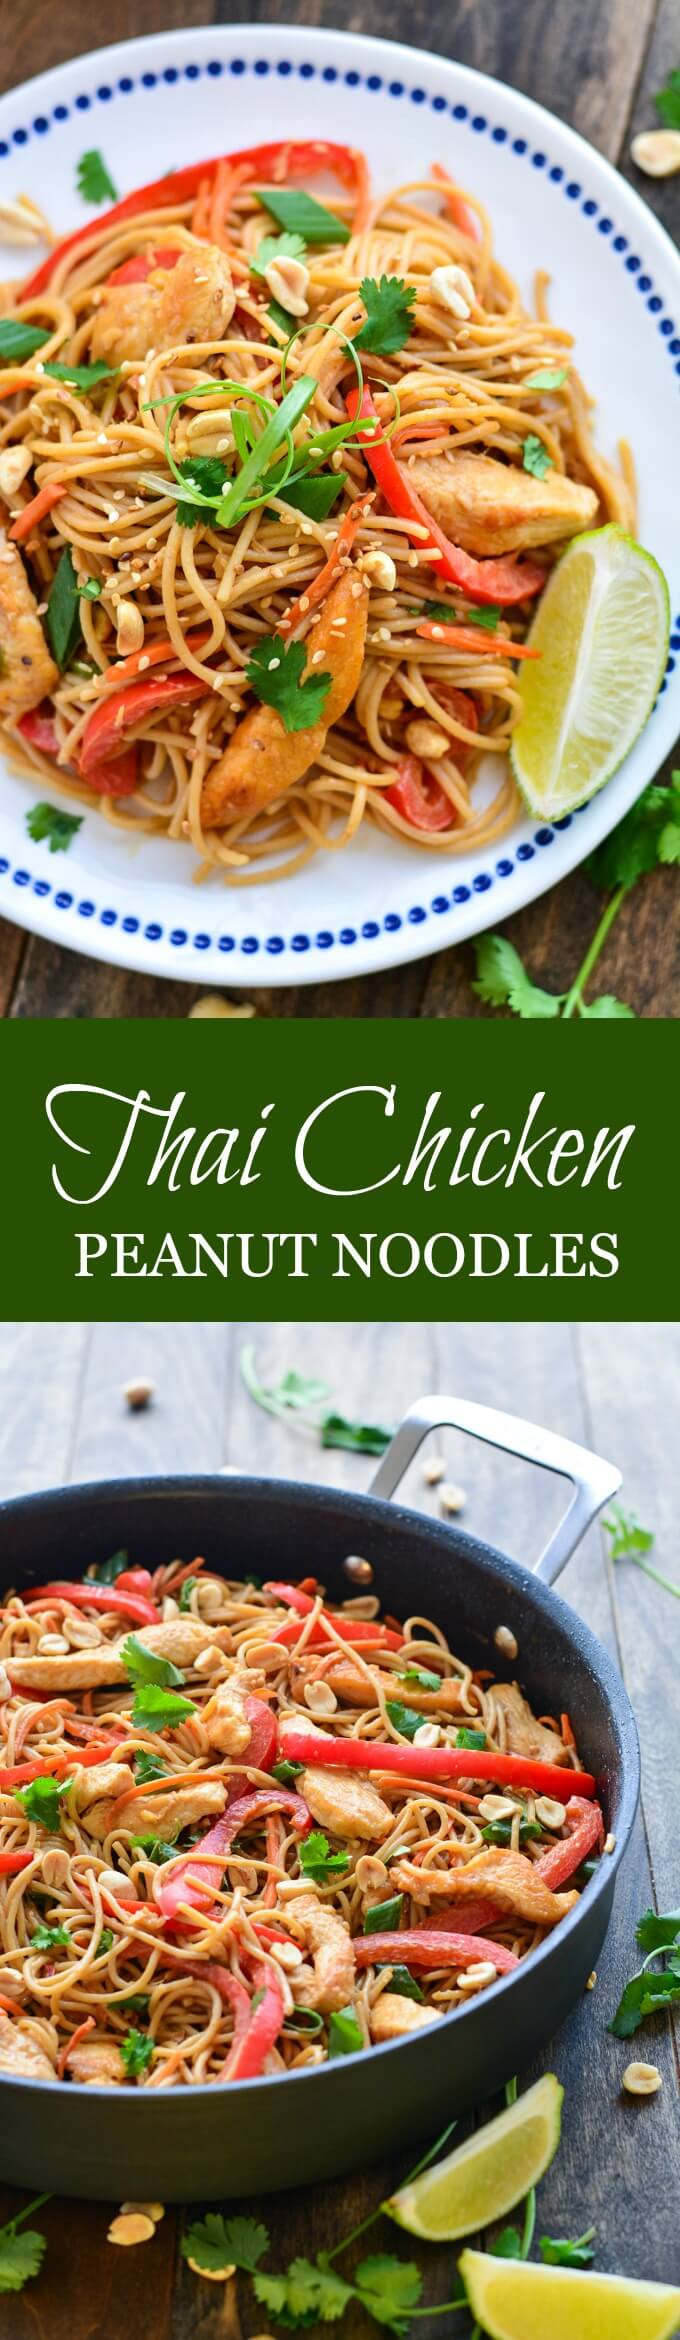 THAI CHICKEN PEANUT NOODLES are made up of whole wheat noodles, lean meat, veggies, and peanut sauce. An easy, healthy meal the family will love!